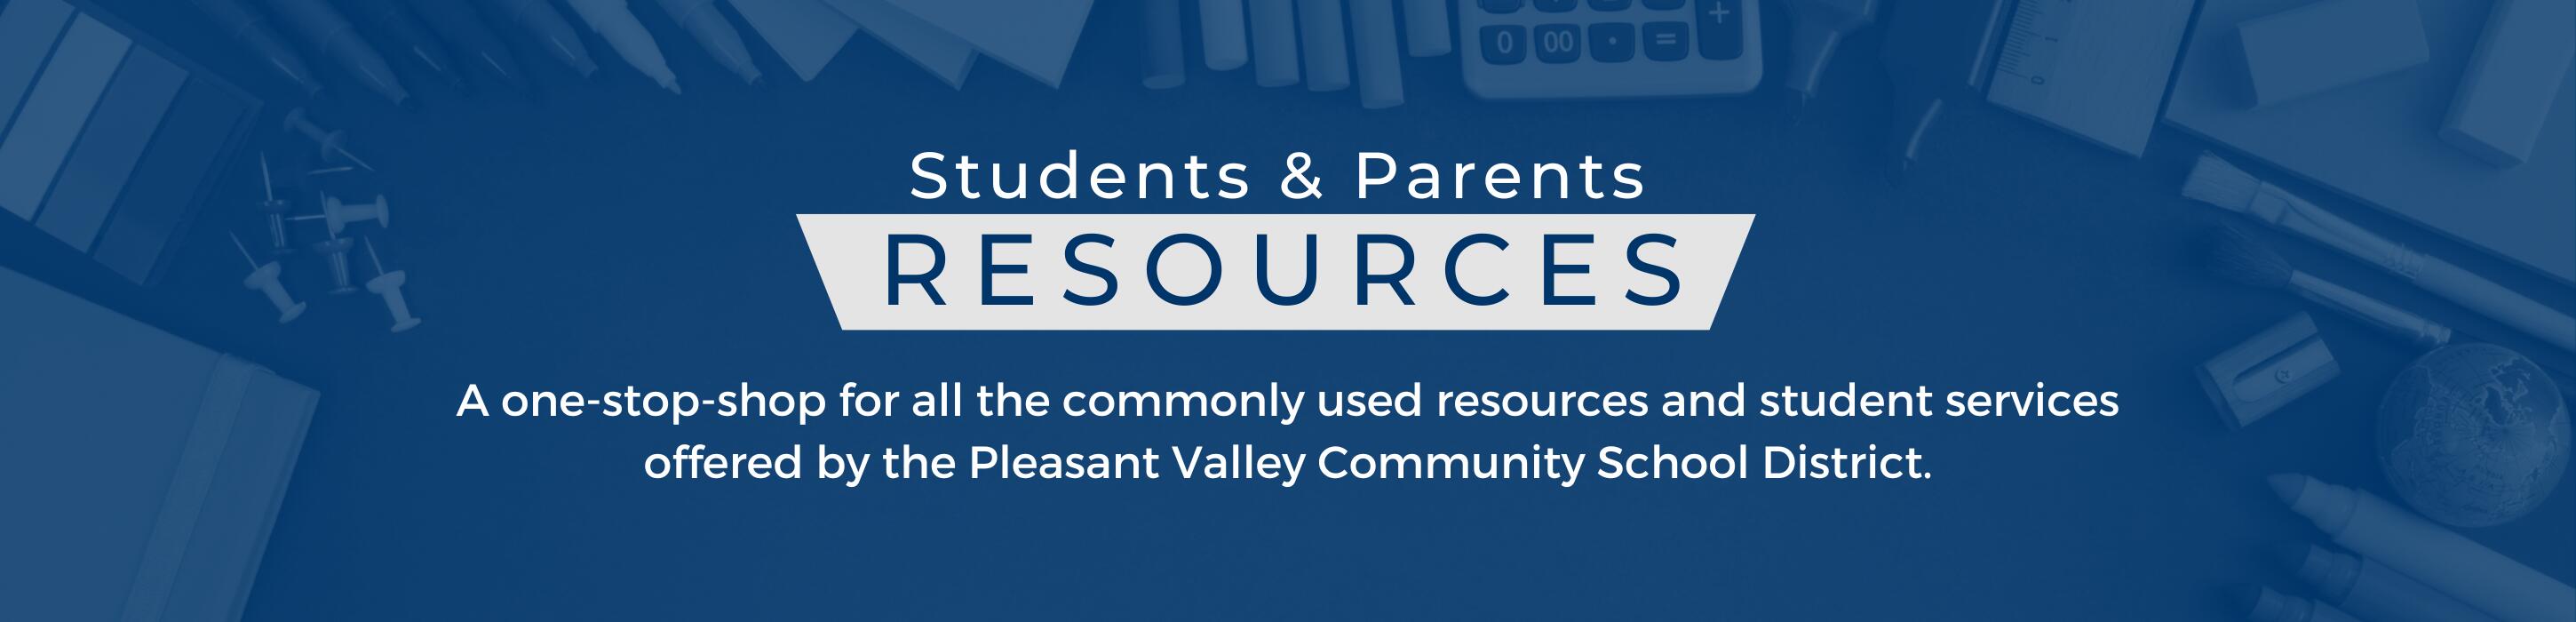 Students and Parents Resources